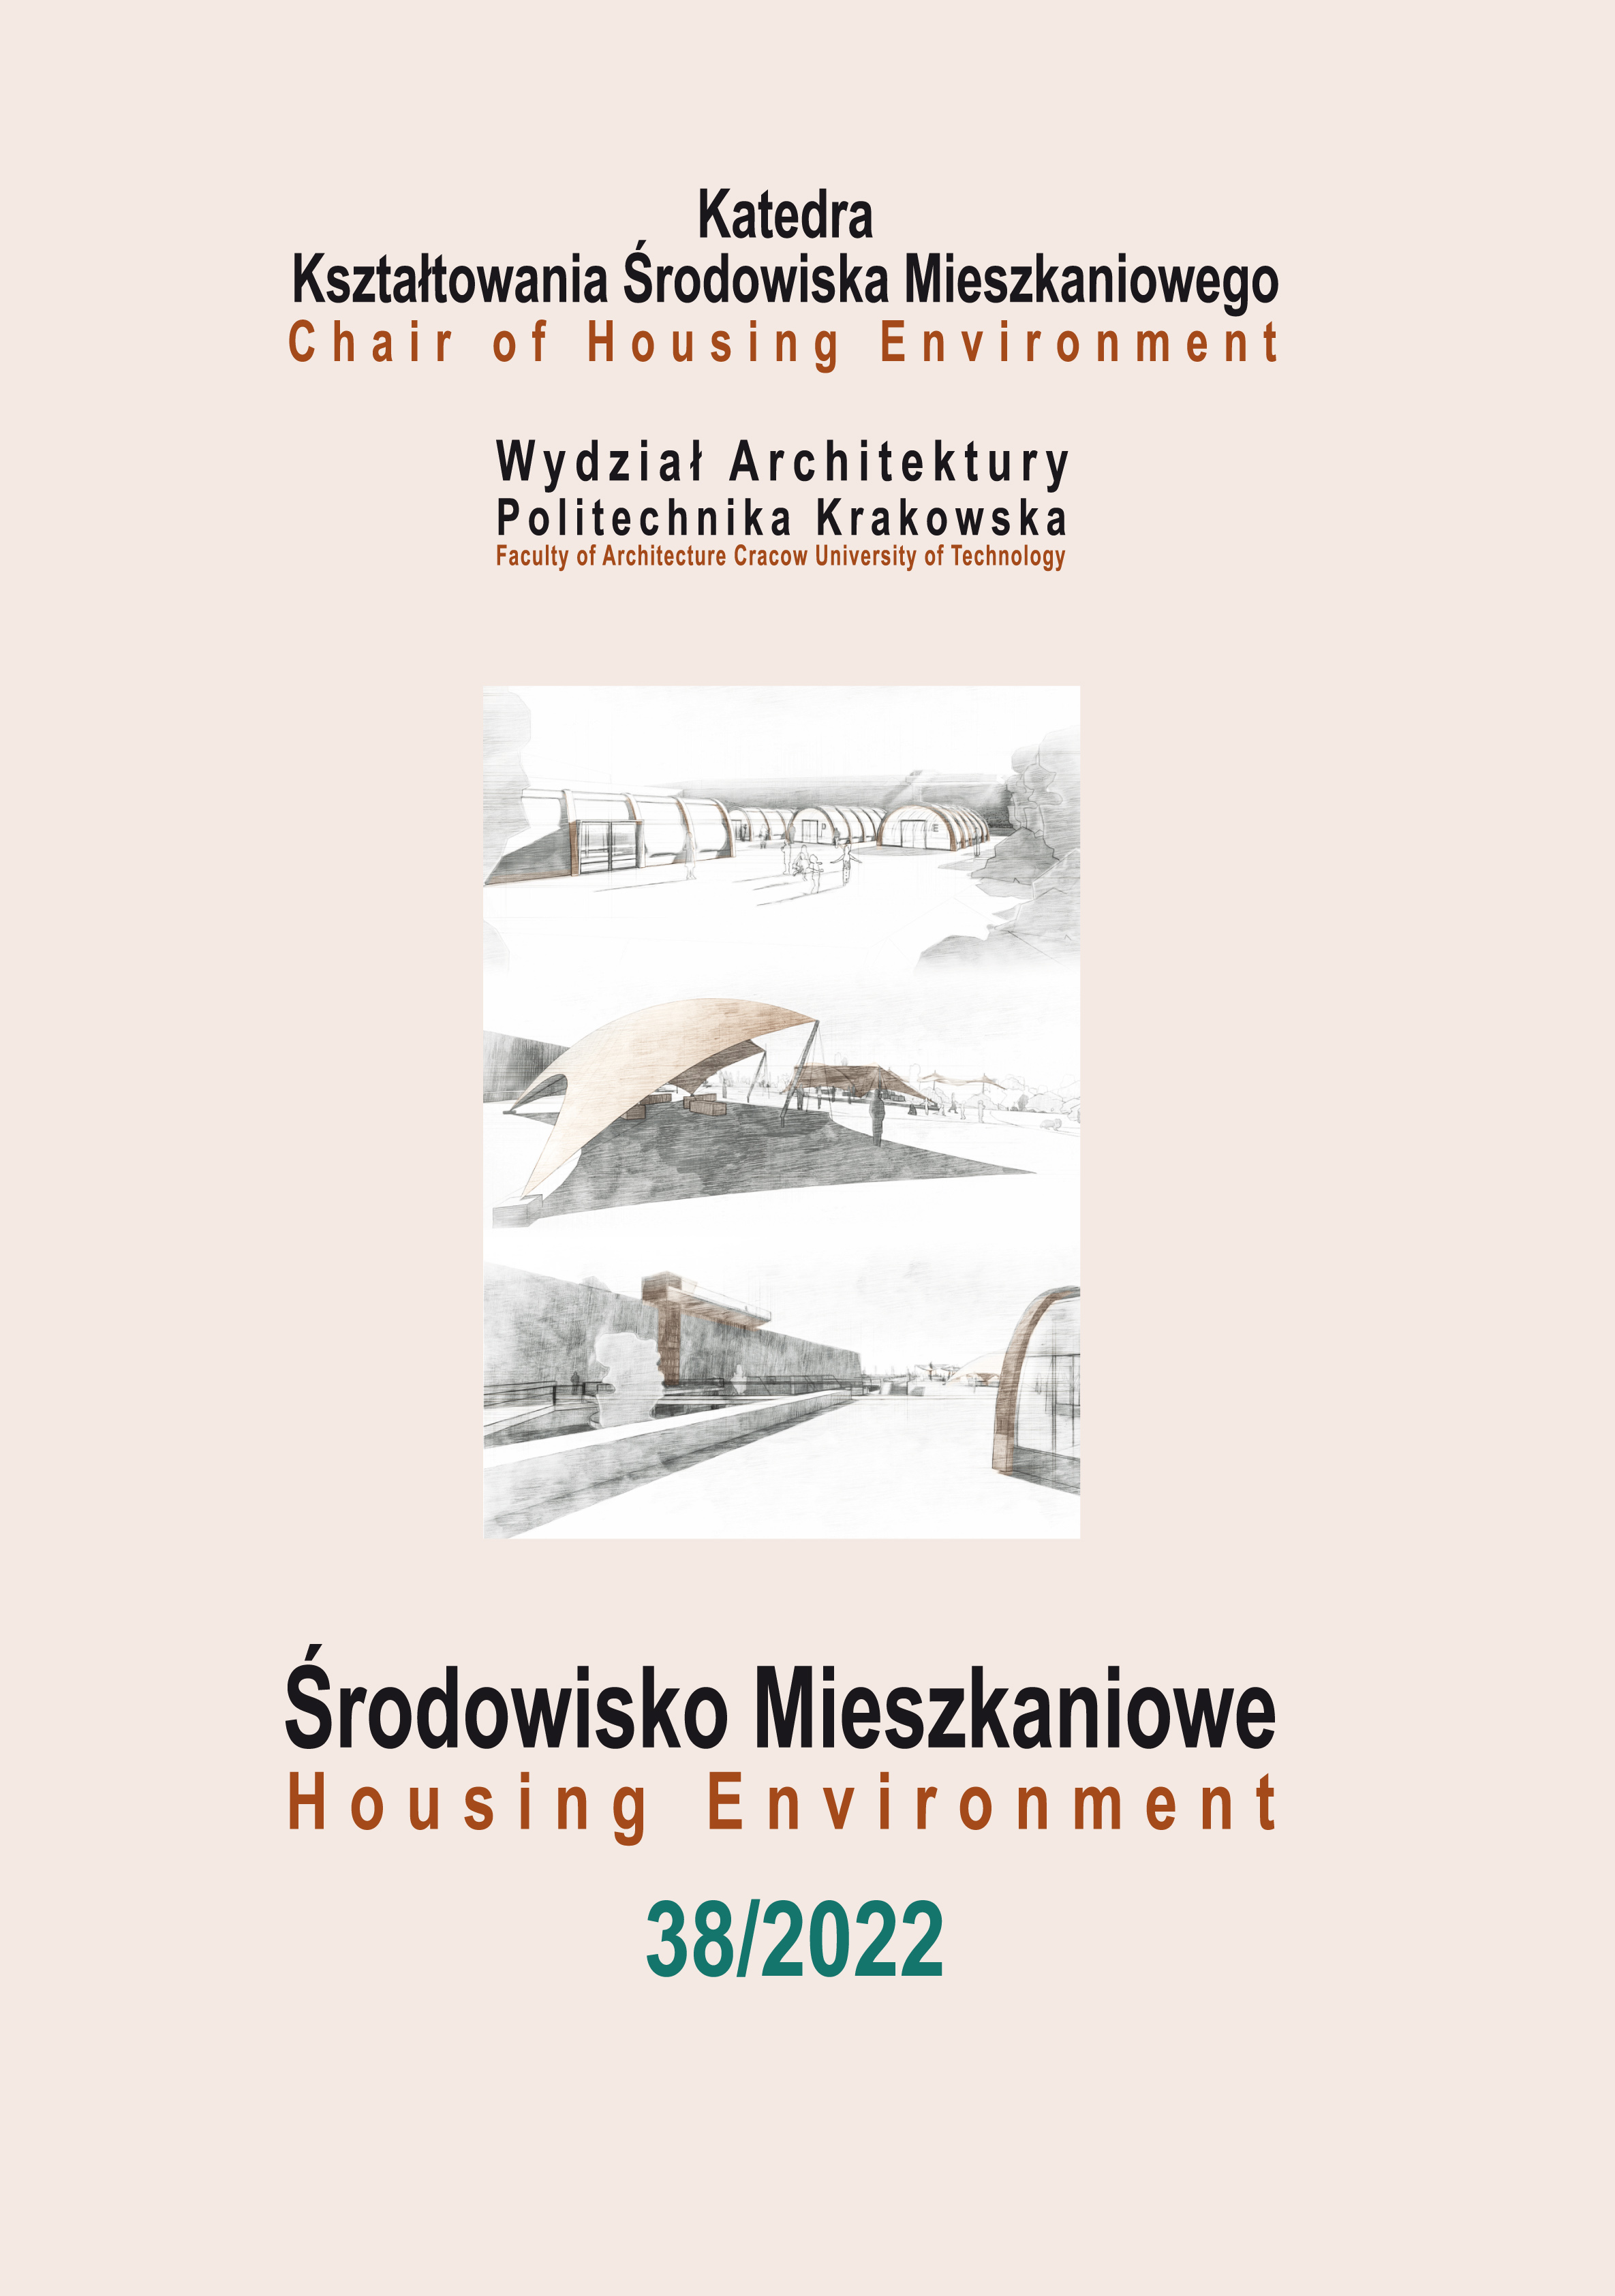 Residential development in post-industrial
and service areas and the availability
of green public spaces – the case of the
„Ludwinów-Mateczny” area in Krakow Cover Image